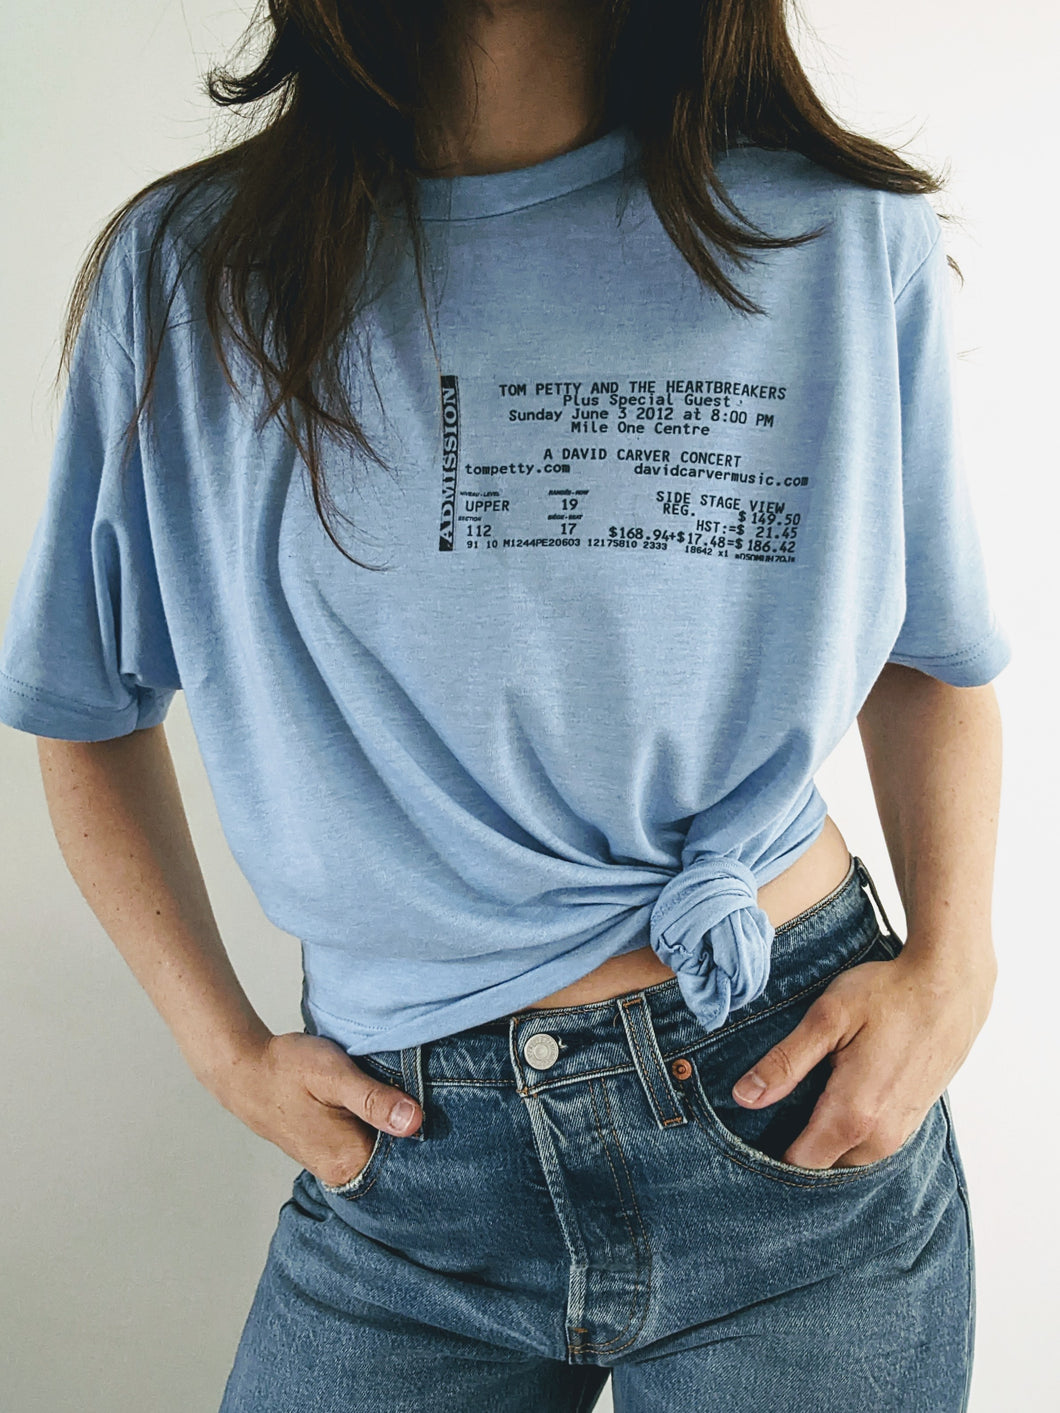 Tee. Ticket tee! Customize your own